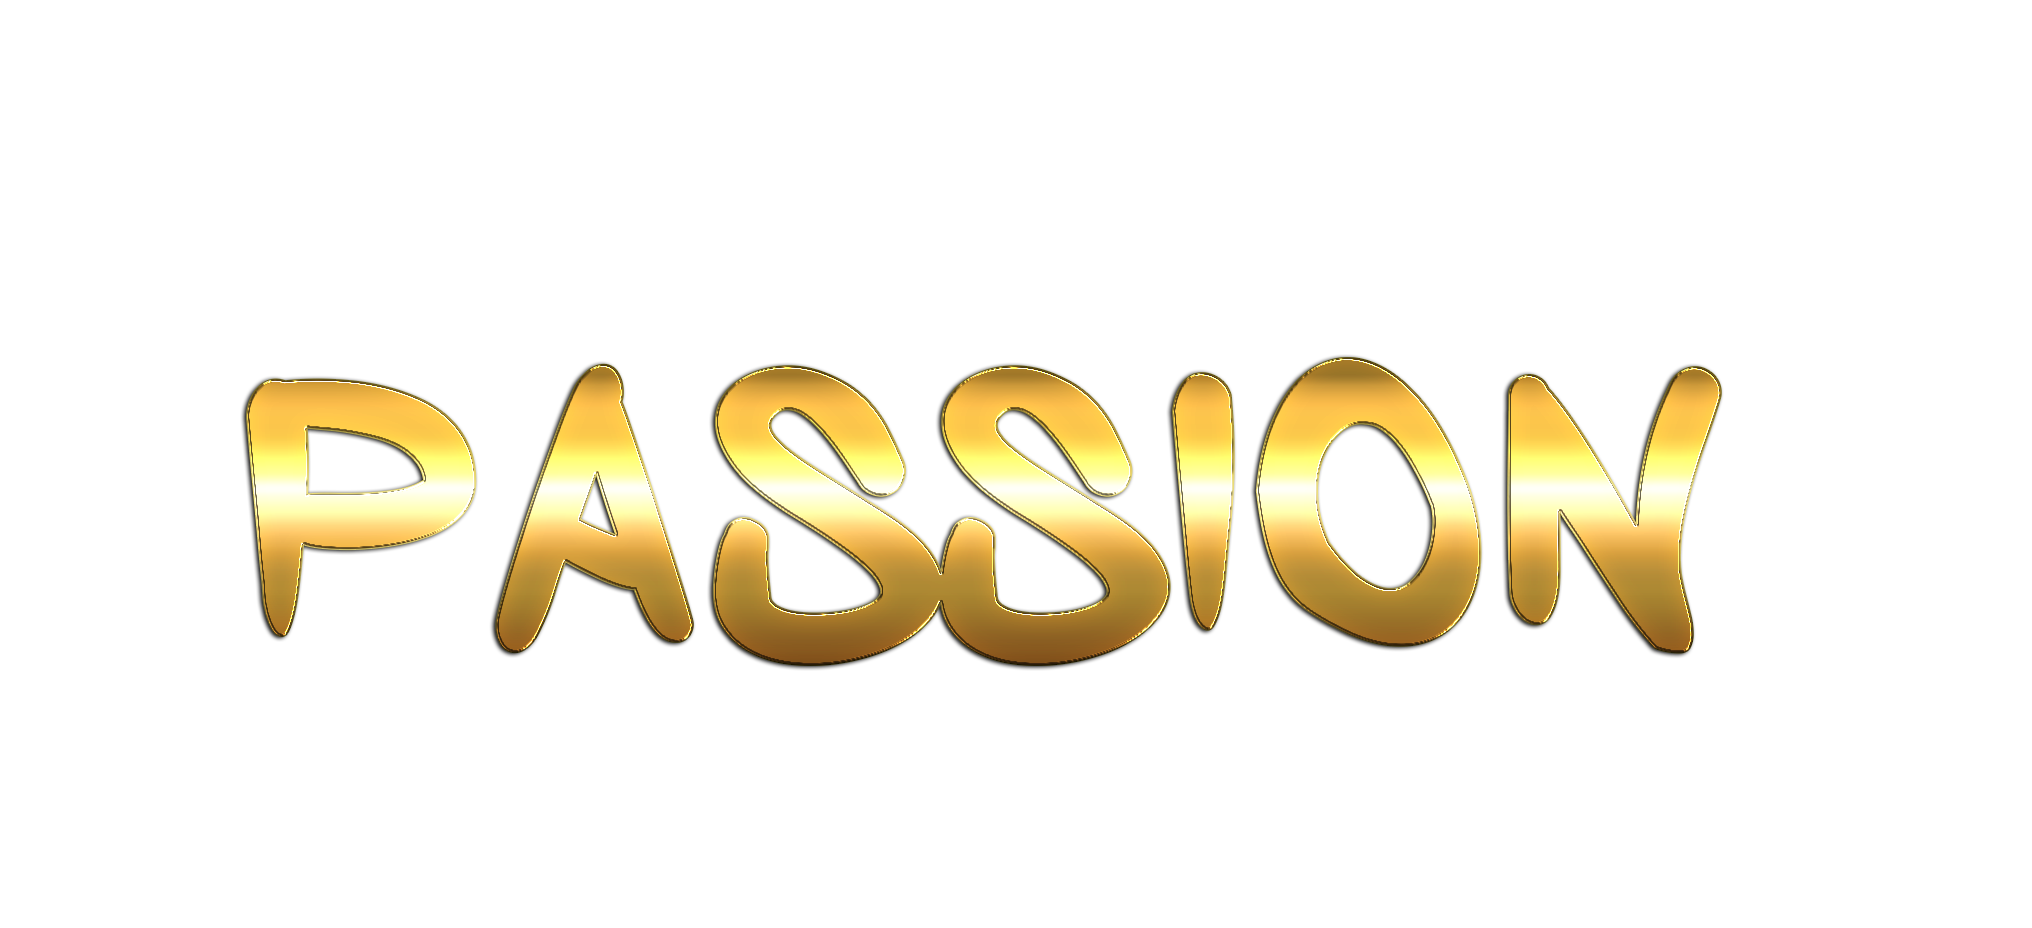 WORD PASSION gold text effects art typography PNG images free